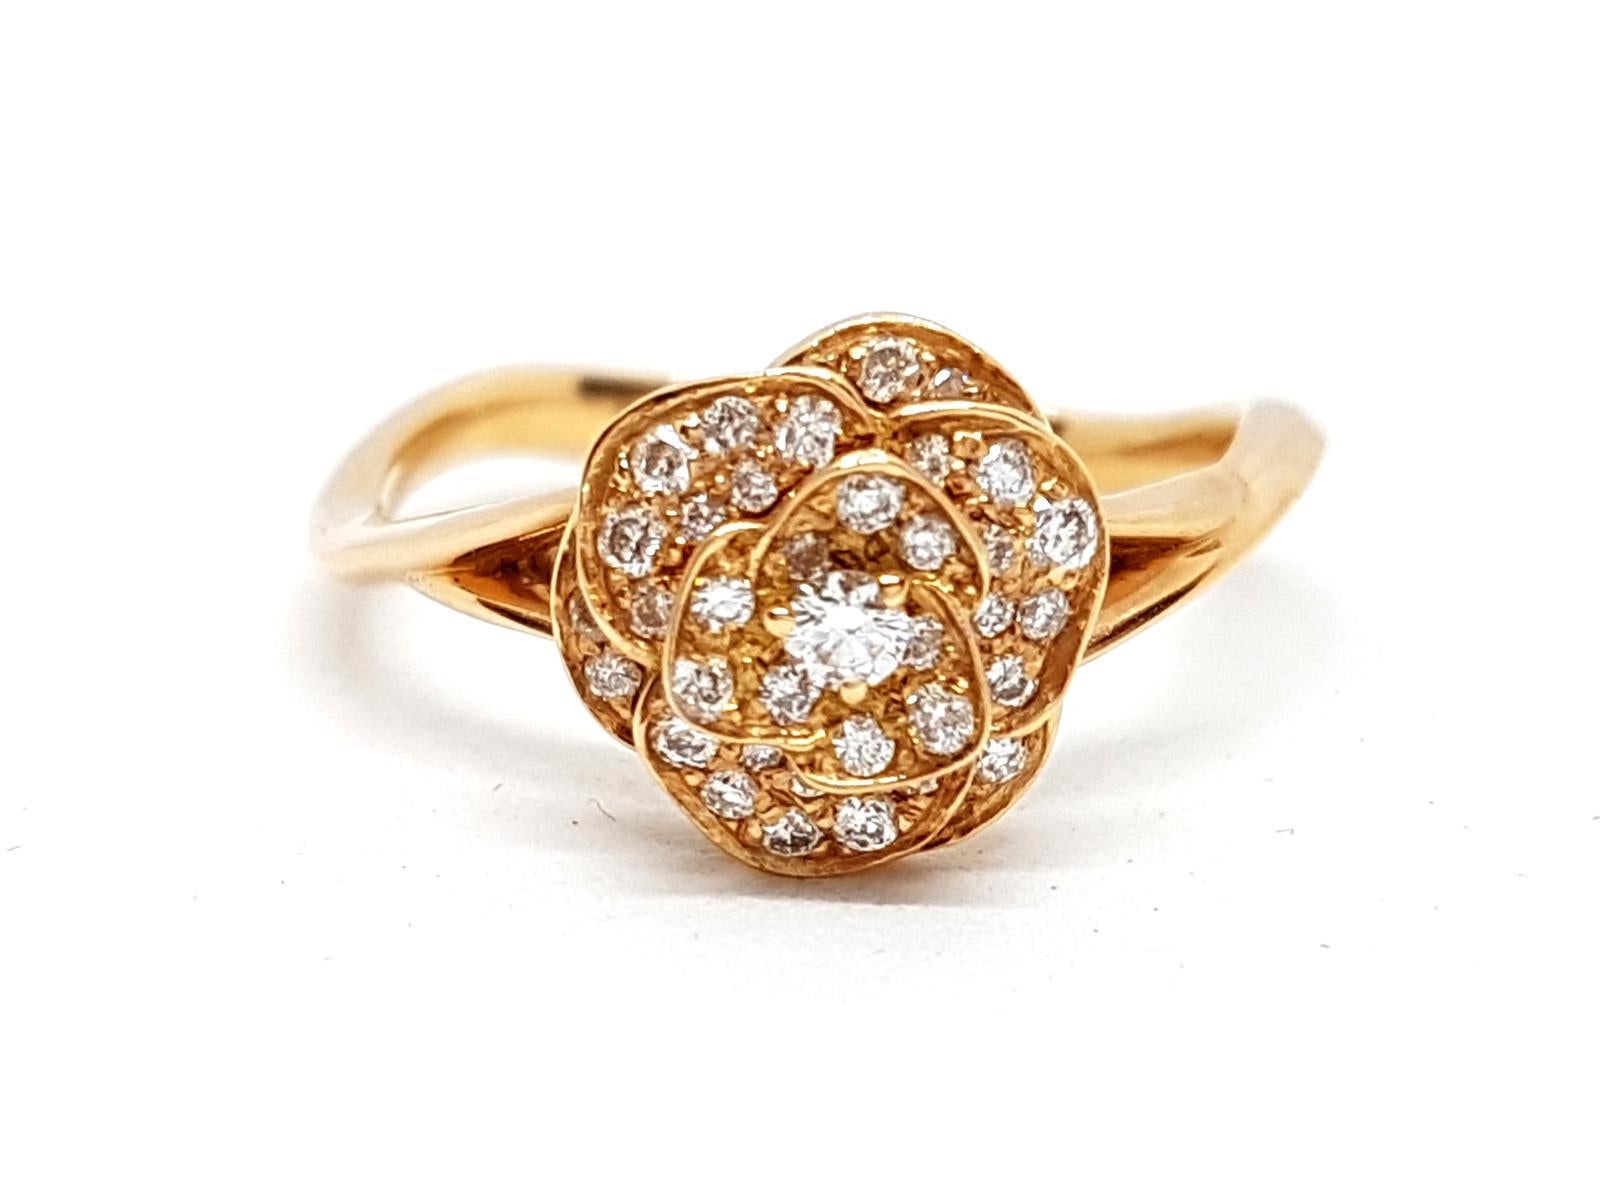 Ring gold flower rose 750 mils (18 carats). petals pavers round brilliant cut diamonds 0.35 ct total ring with wave motion. ring size: 53. flower diameter: 0.97 cm. total weight : 2.82 g. punch eagle's head. new state
